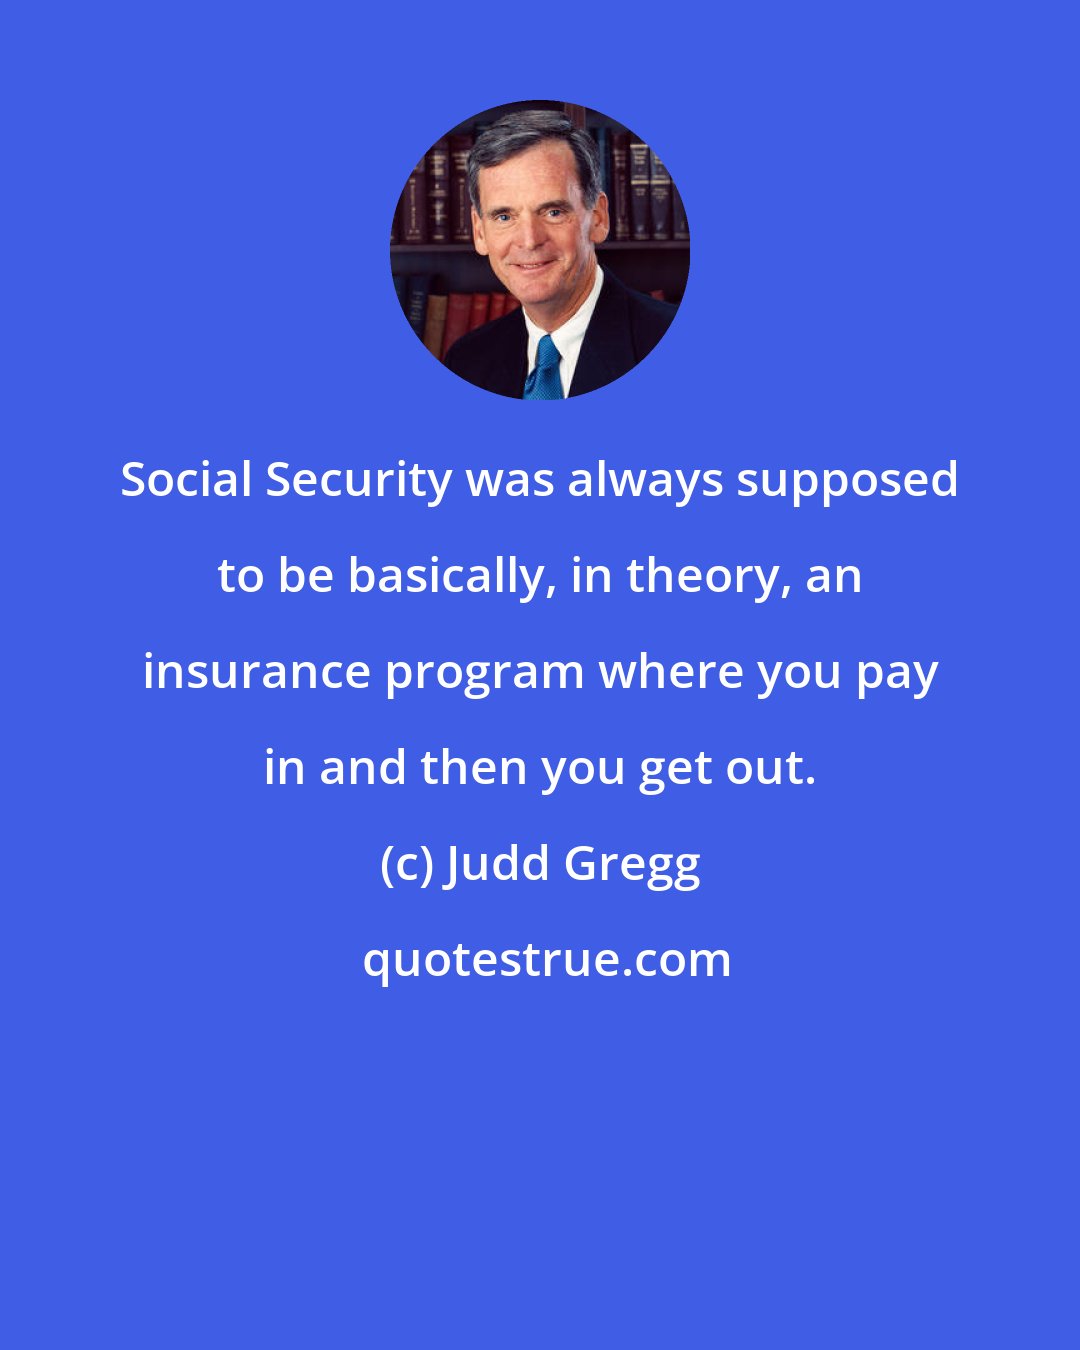 Judd Gregg: Social Security was always supposed to be basically, in theory, an insurance program where you pay in and then you get out.